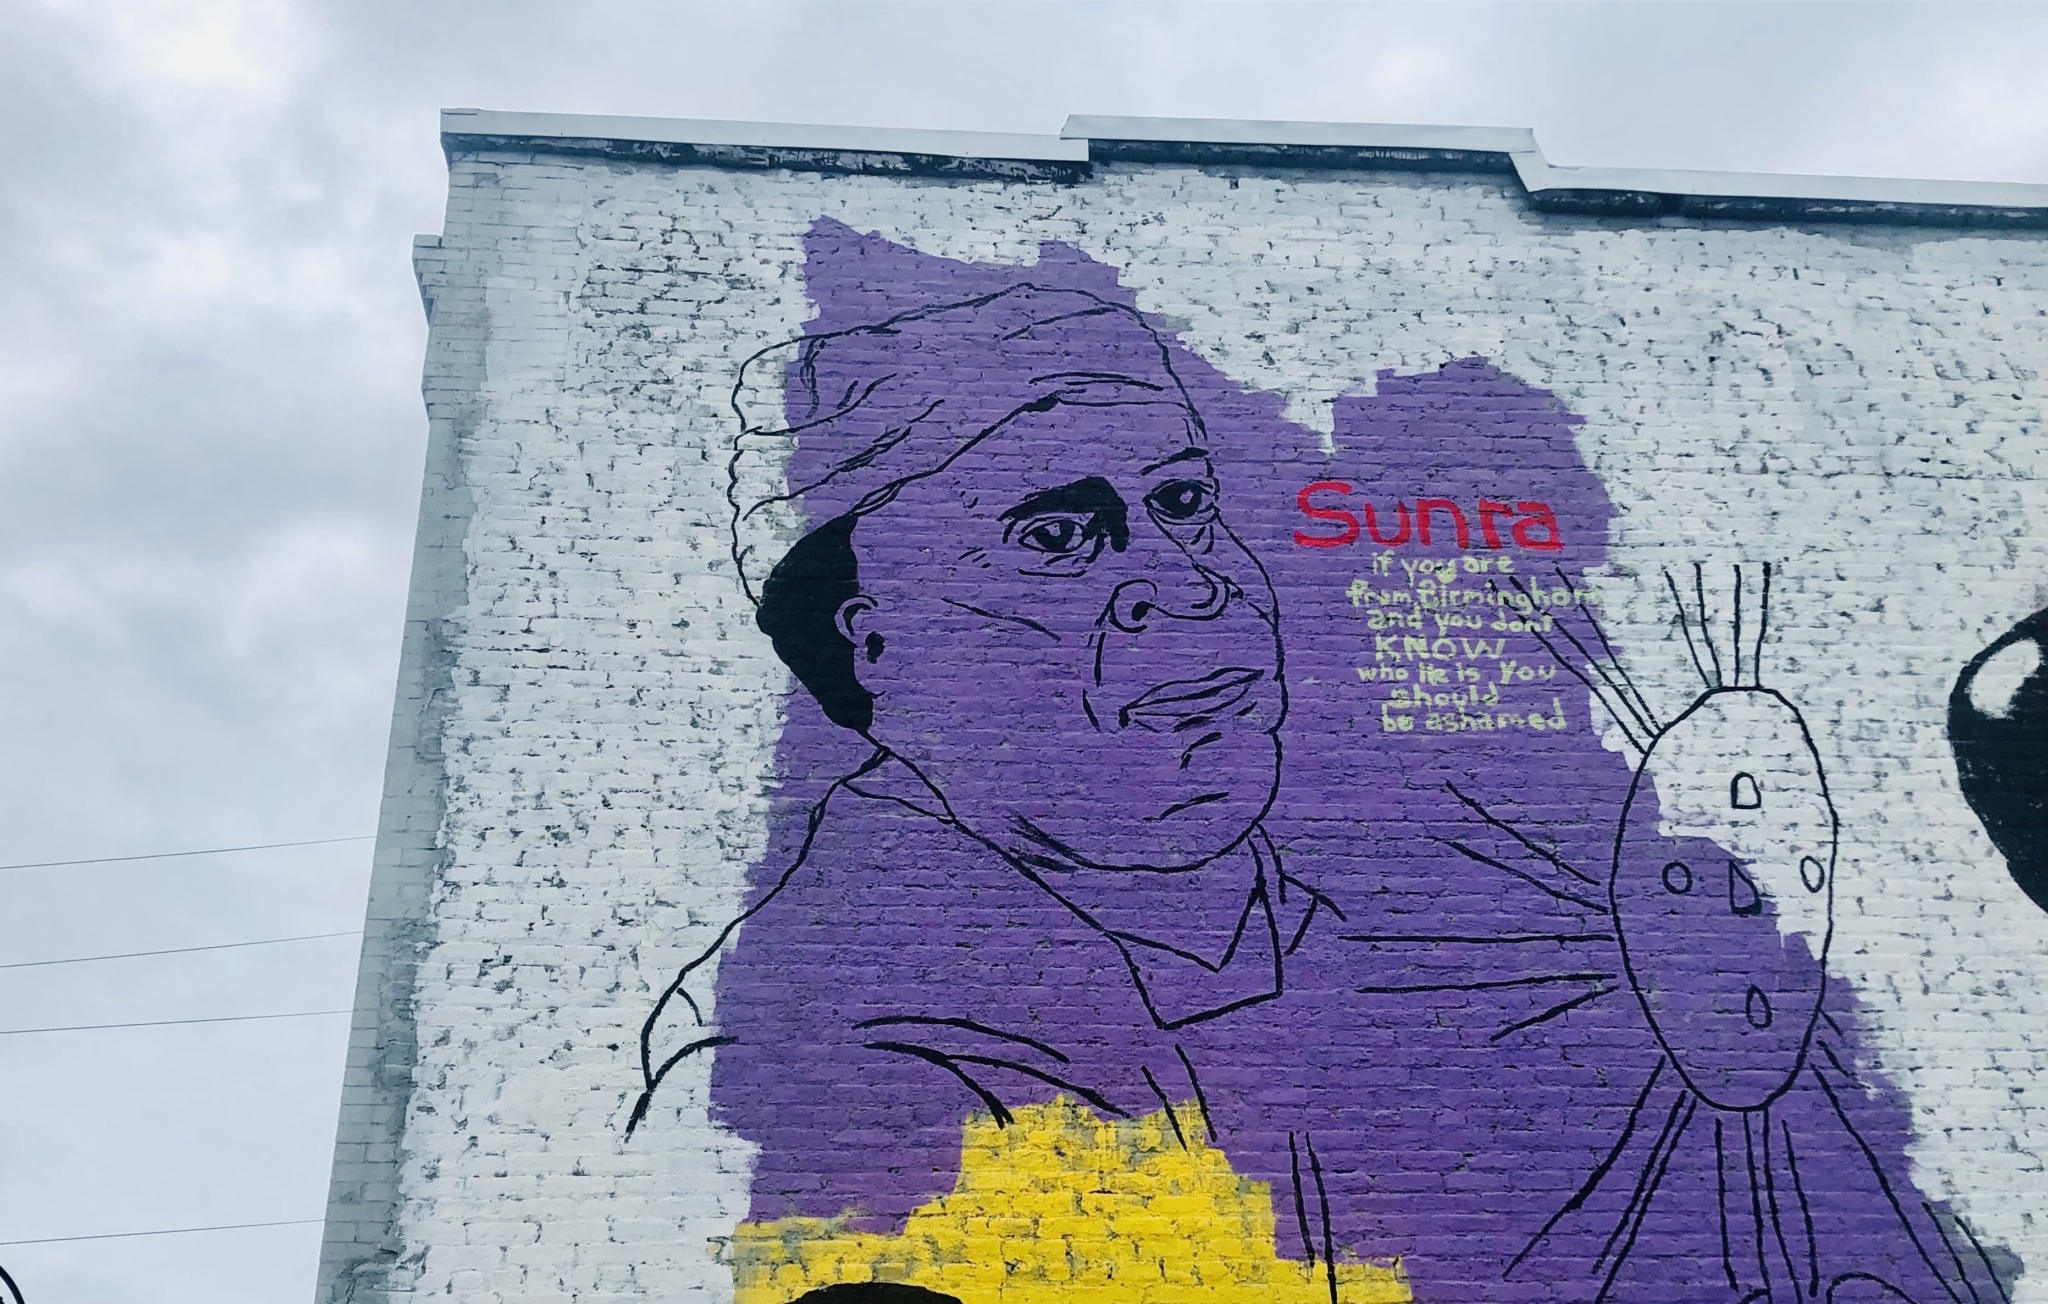 Sun Ra mural on 41st Street: "If you are from Birmingham and you don't know who he is you should be ashamed." Photo by Pat Byington for Bham Now